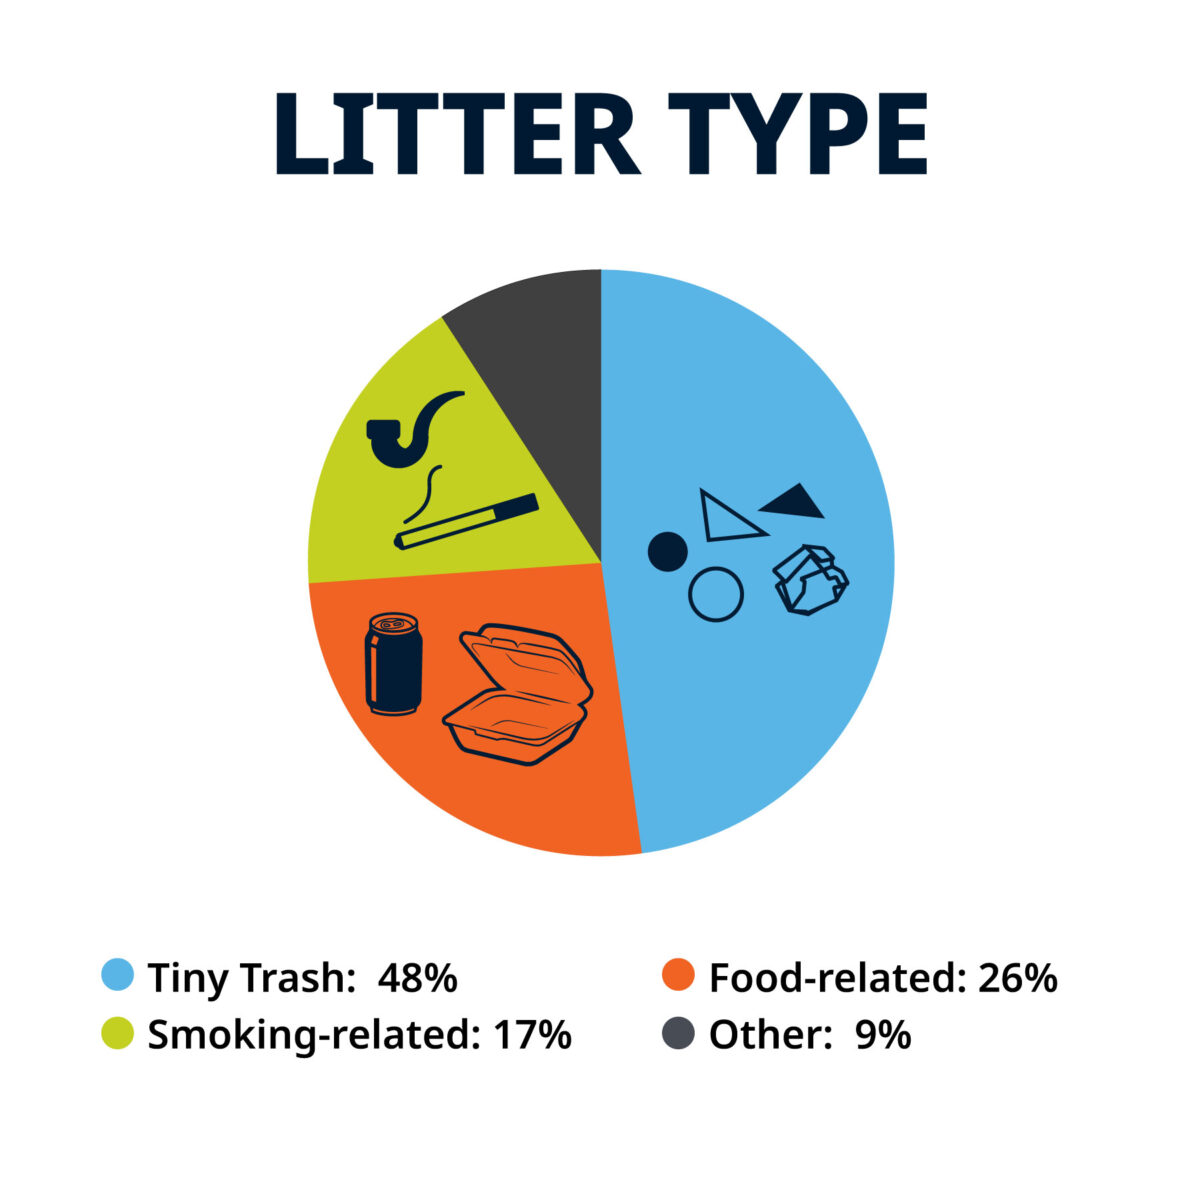 Litter Type: 48% tiny trash, 26% food-related, 17% smoking-related, 9% other.